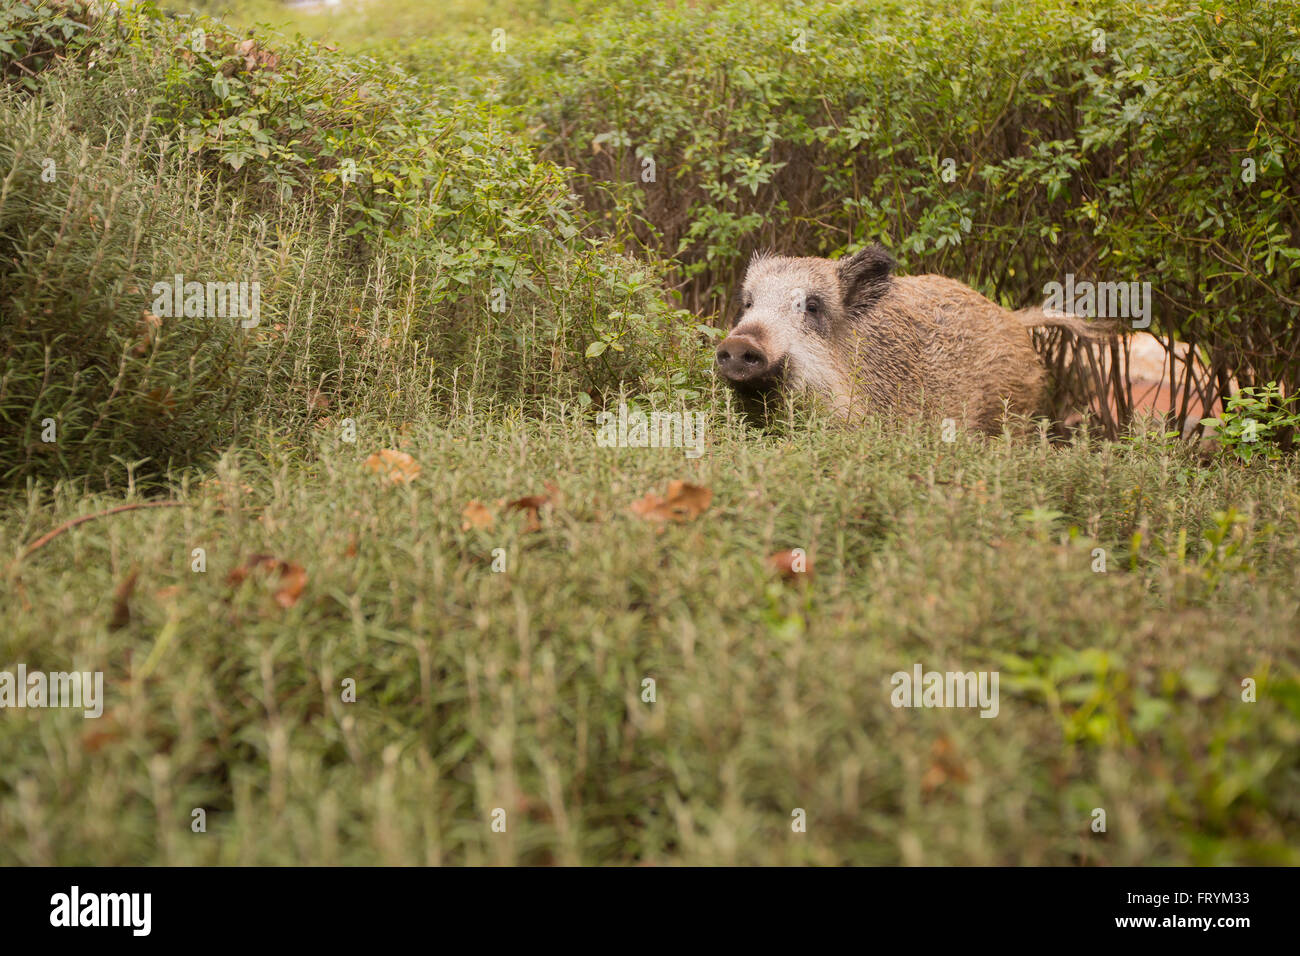 A wild boar (Sus scrofa) Photographed in Israel in January Stock Photo